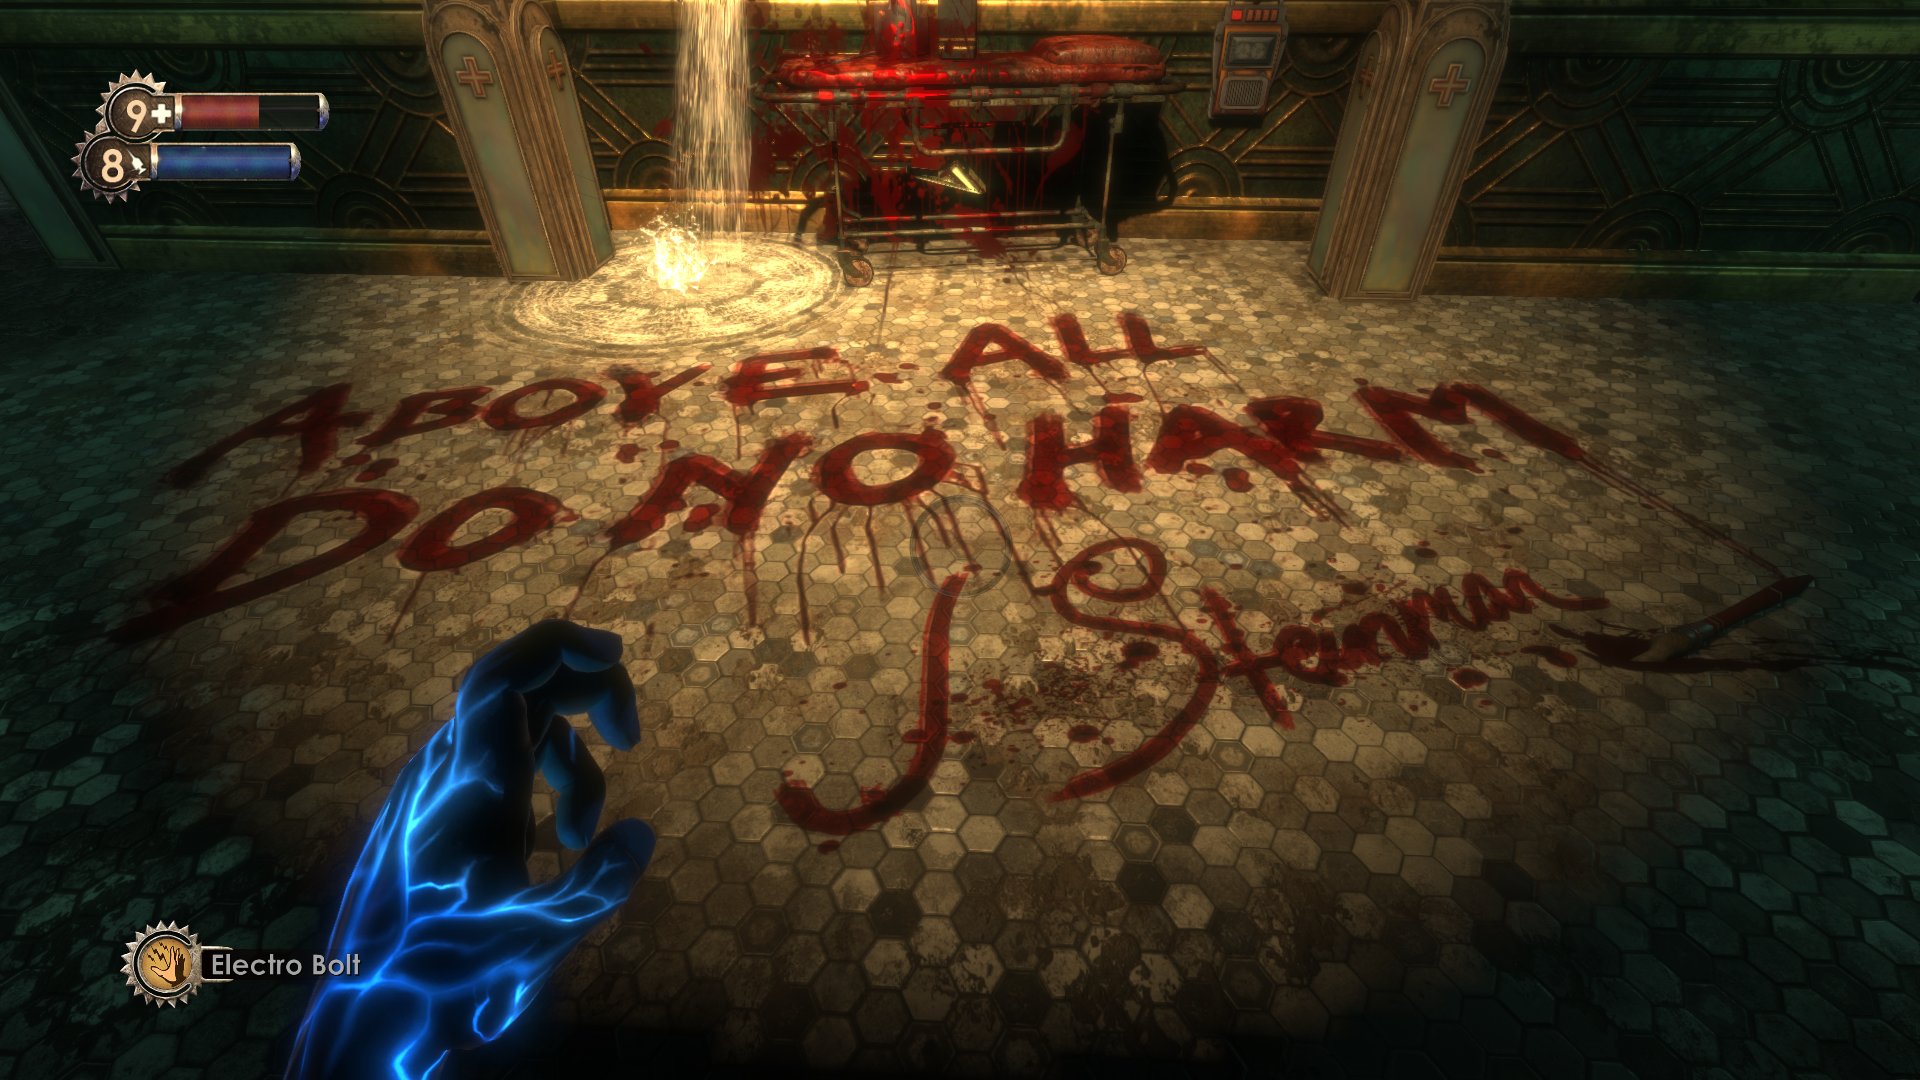 The words "ABOVE ALL DO NO HARM - J. Steinman" written on the floor in blood.